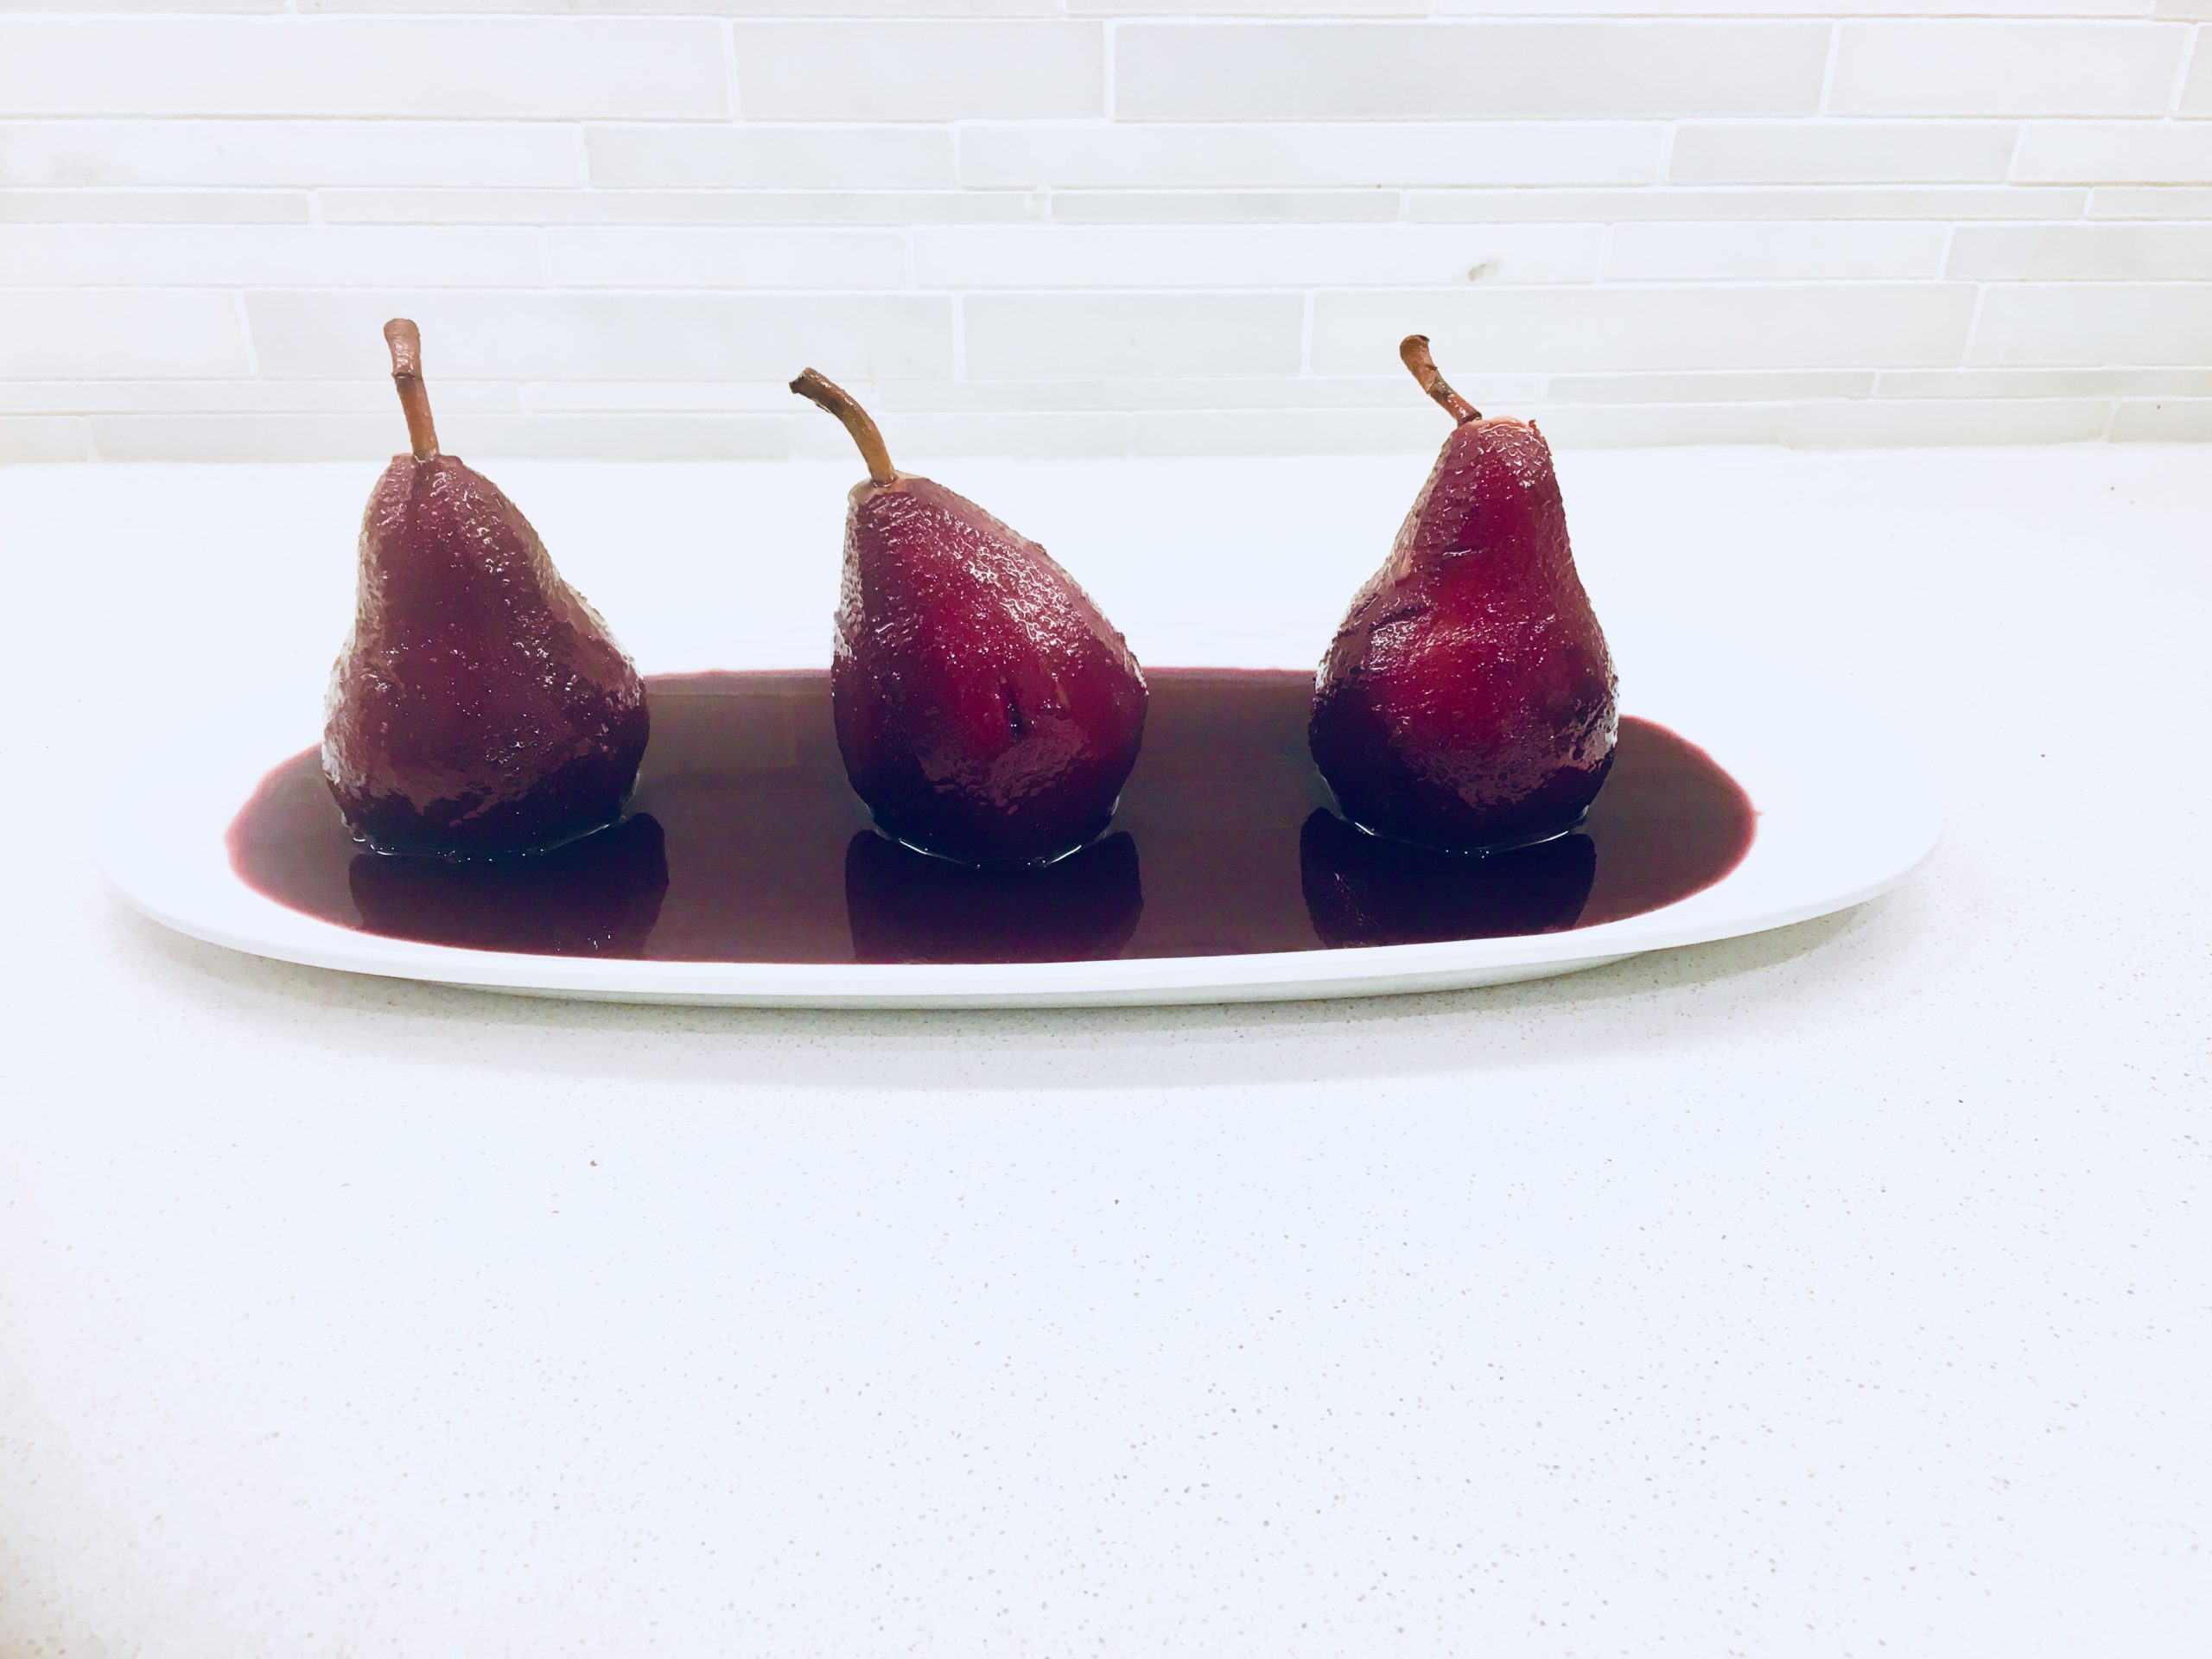 Poached pears in red wine